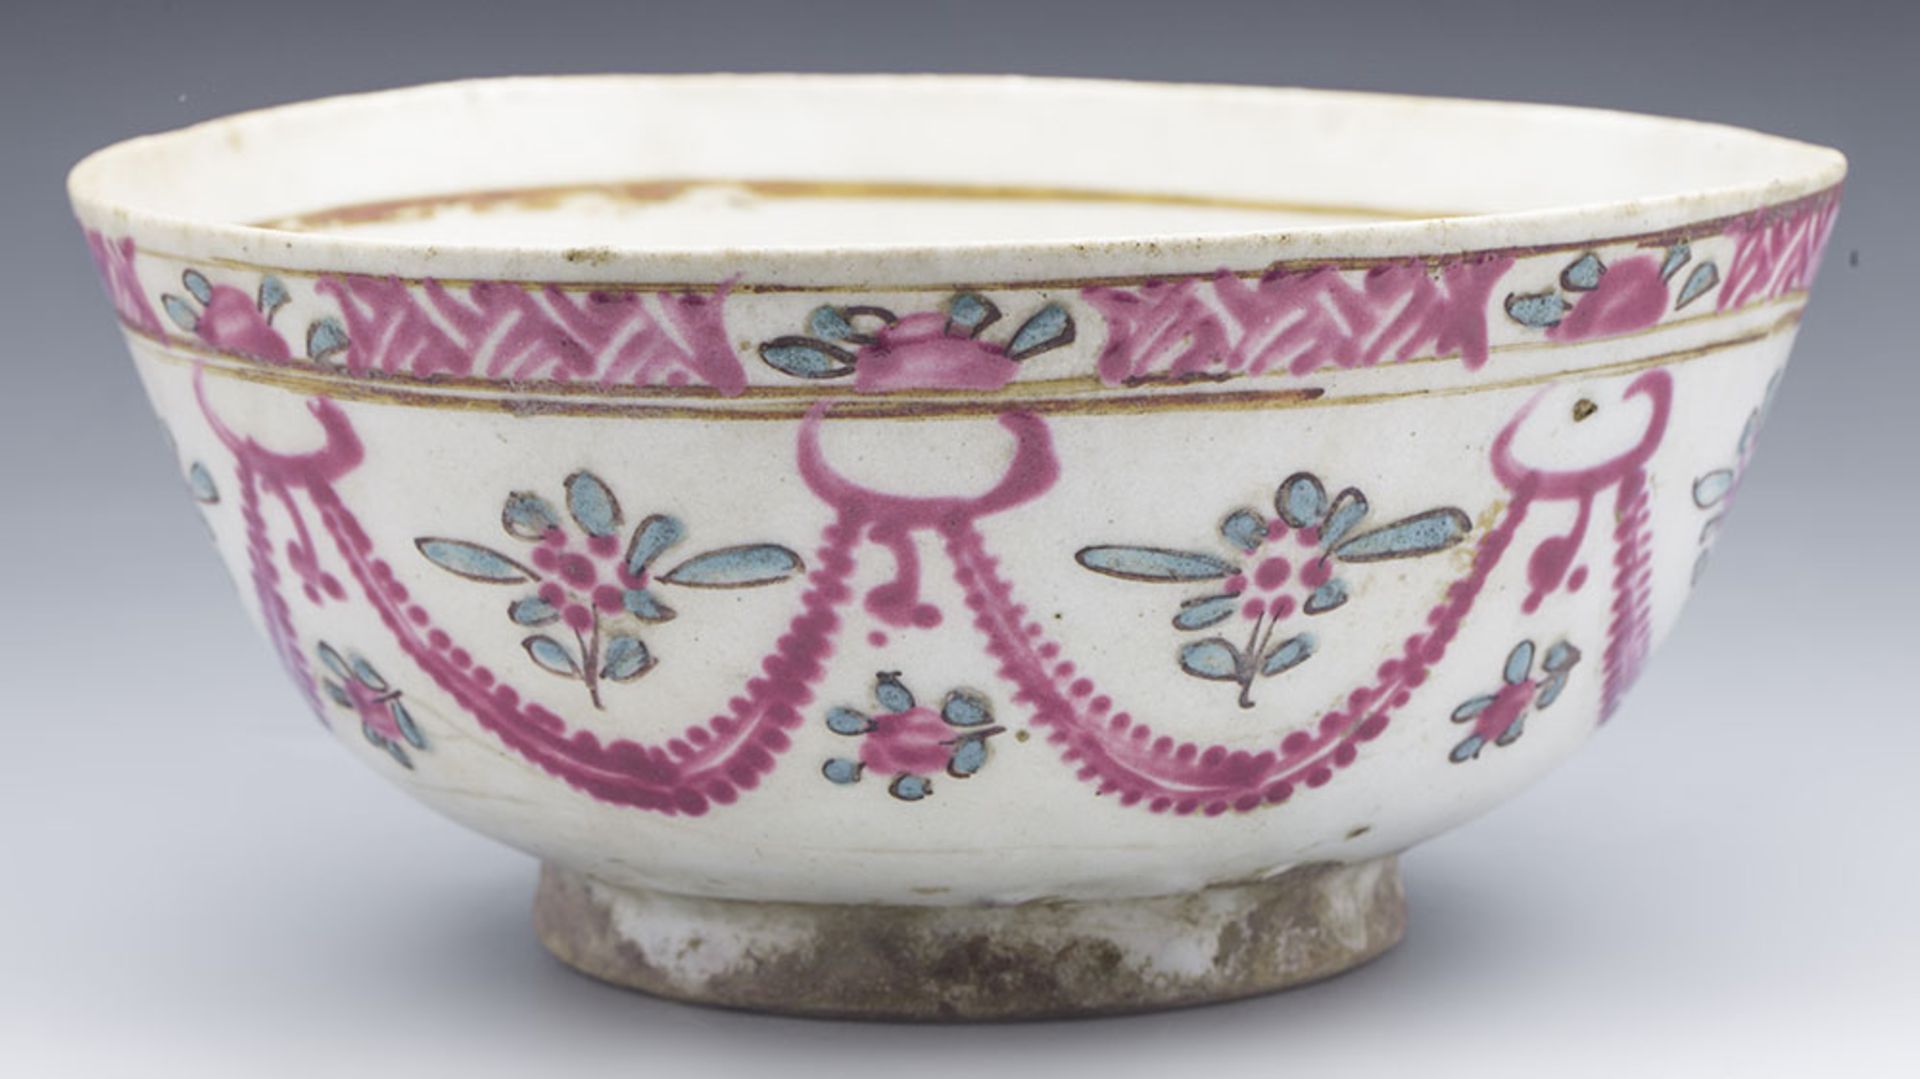 ANTIQUE MIDDLE EASTERN BOWL WITH FLORAL GARLANDS 17/18TH C. - Image 4 of 12